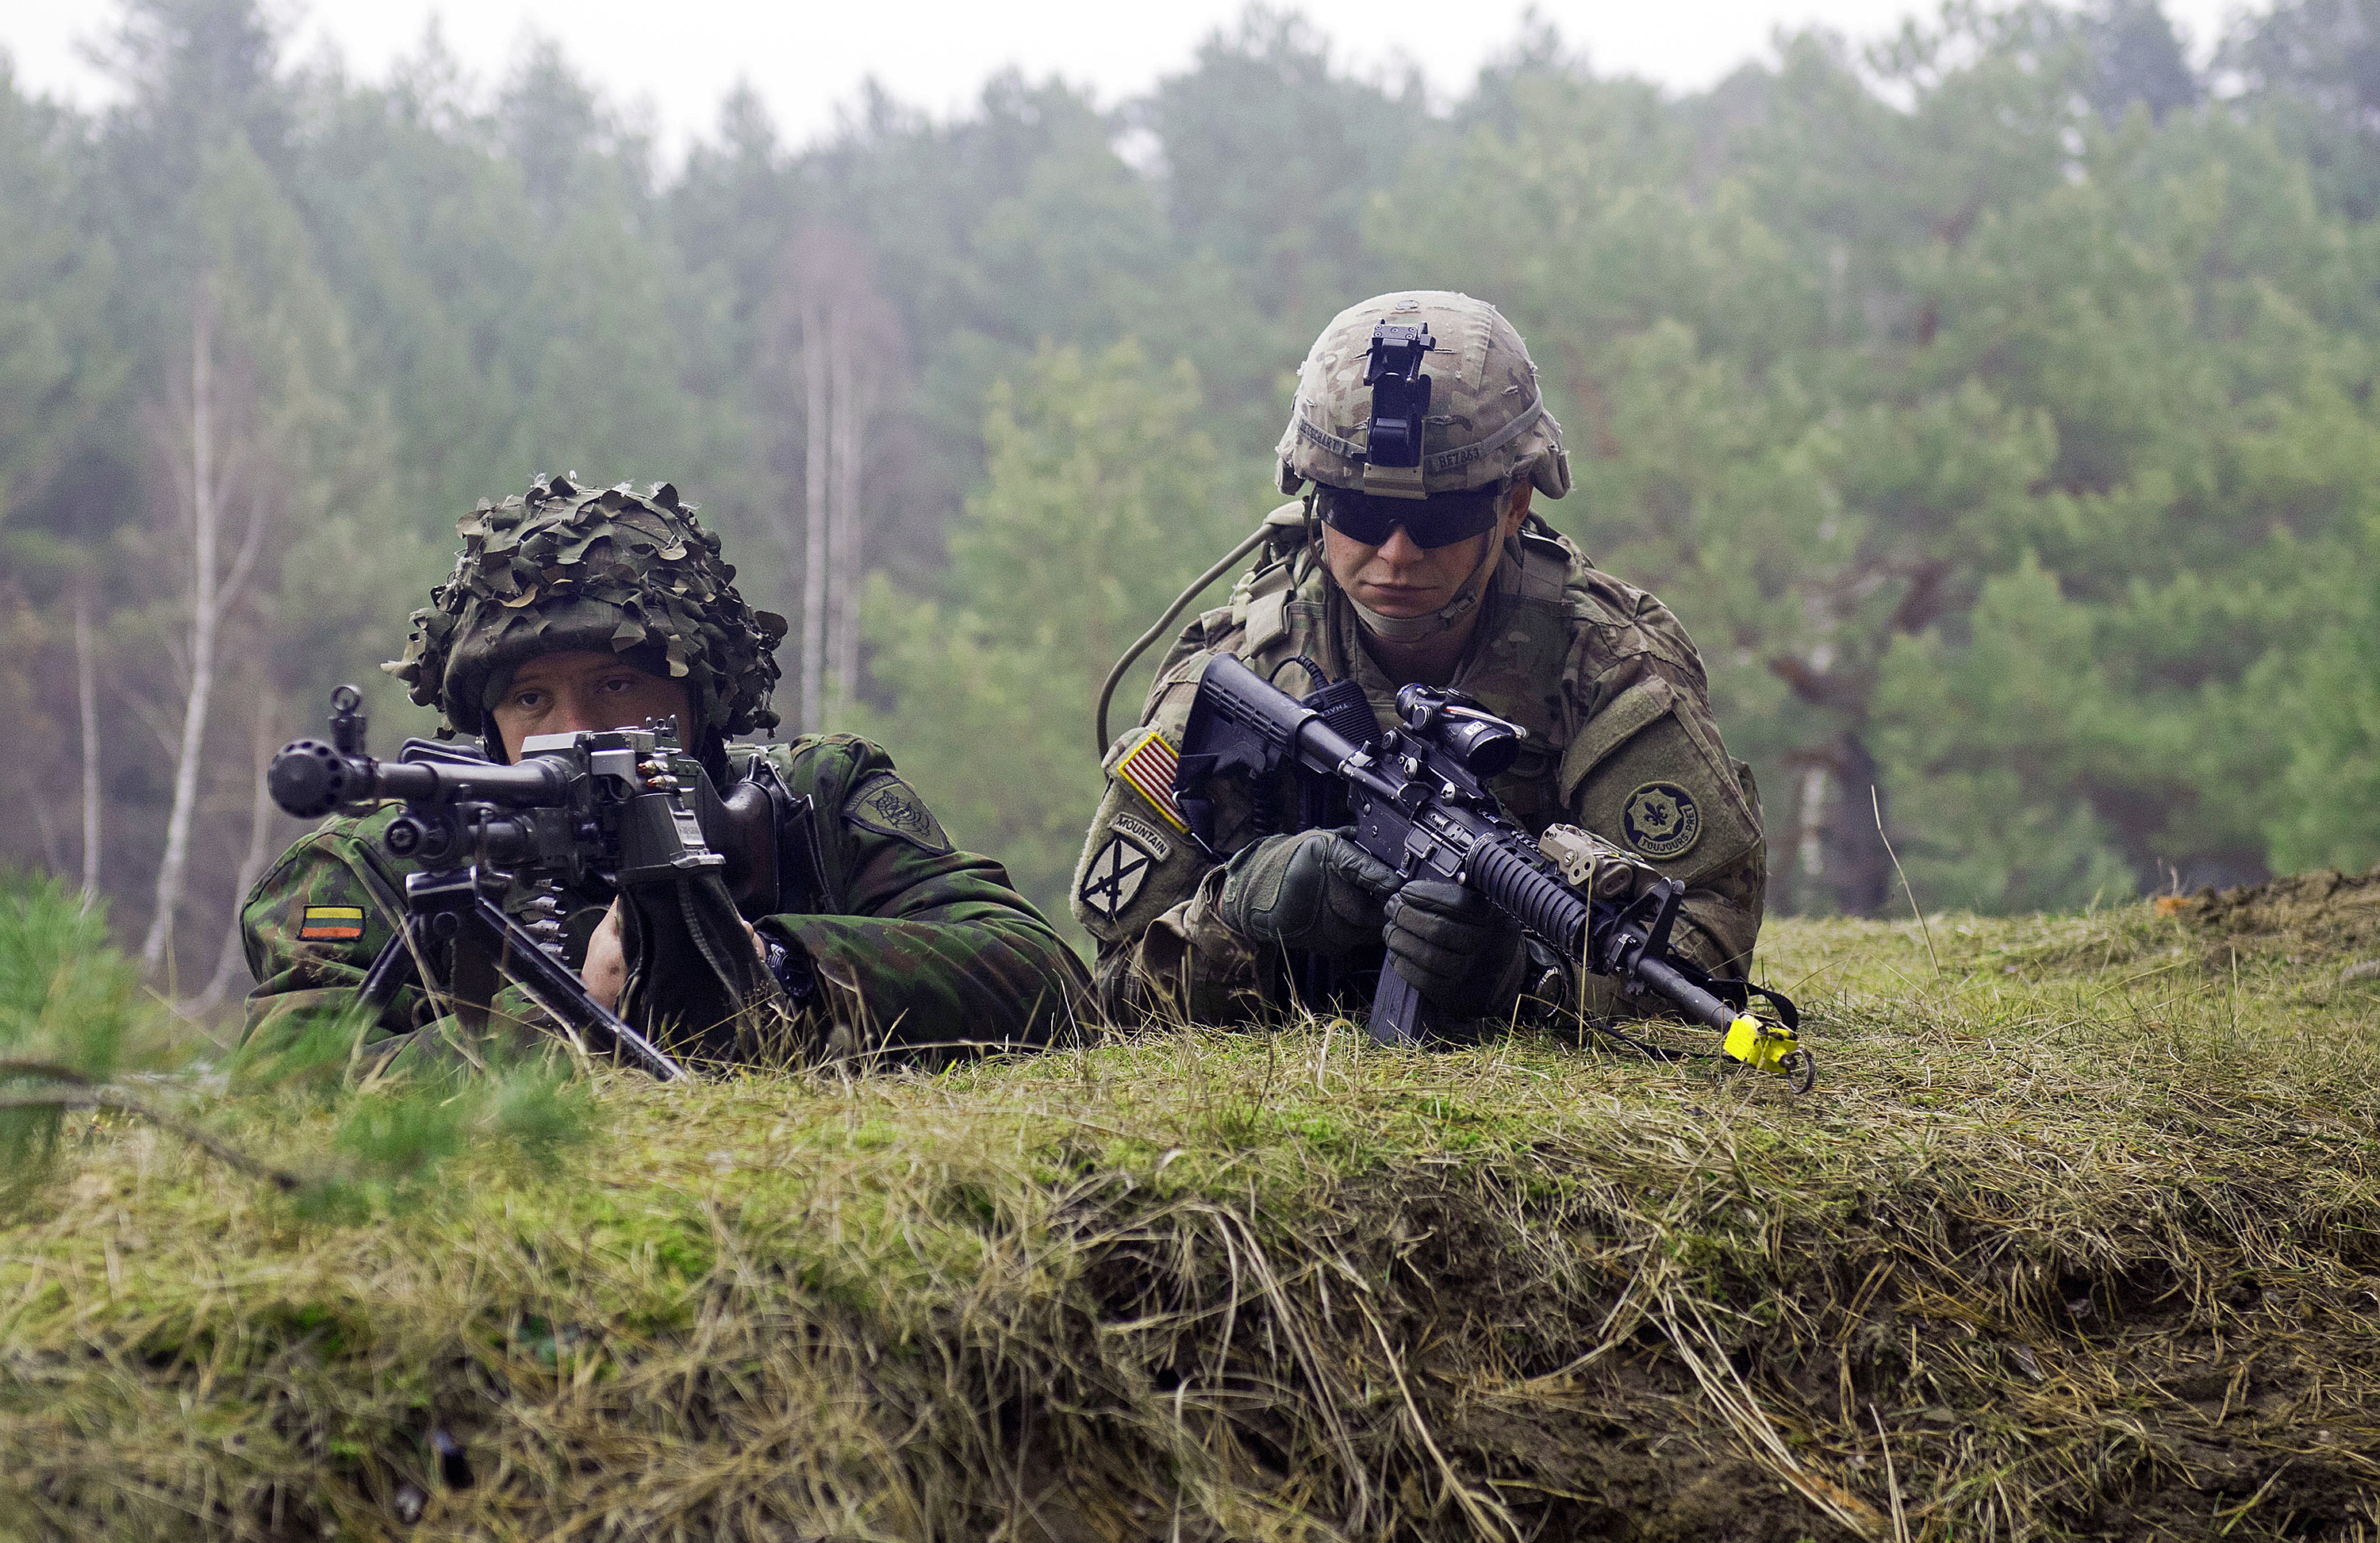 Spc. Shawn Betschart of 3rd Platoon, Lightning Troop, 3rd Squadron, 2nd Cavalry Regiment, secures the perimeter with a Lithuanian counterpart during an offensive operations exercise at the Pabrade training area in February in Lithuania. U.S. troops and Lithuanian soldiers of 3rd Company, Algirdas Mechanized Infantry Battalion, worked together in a three-day field training exercise in support of Operation Atlantic Resolve. (Photo by Staff Sgt. Megan Leuck)